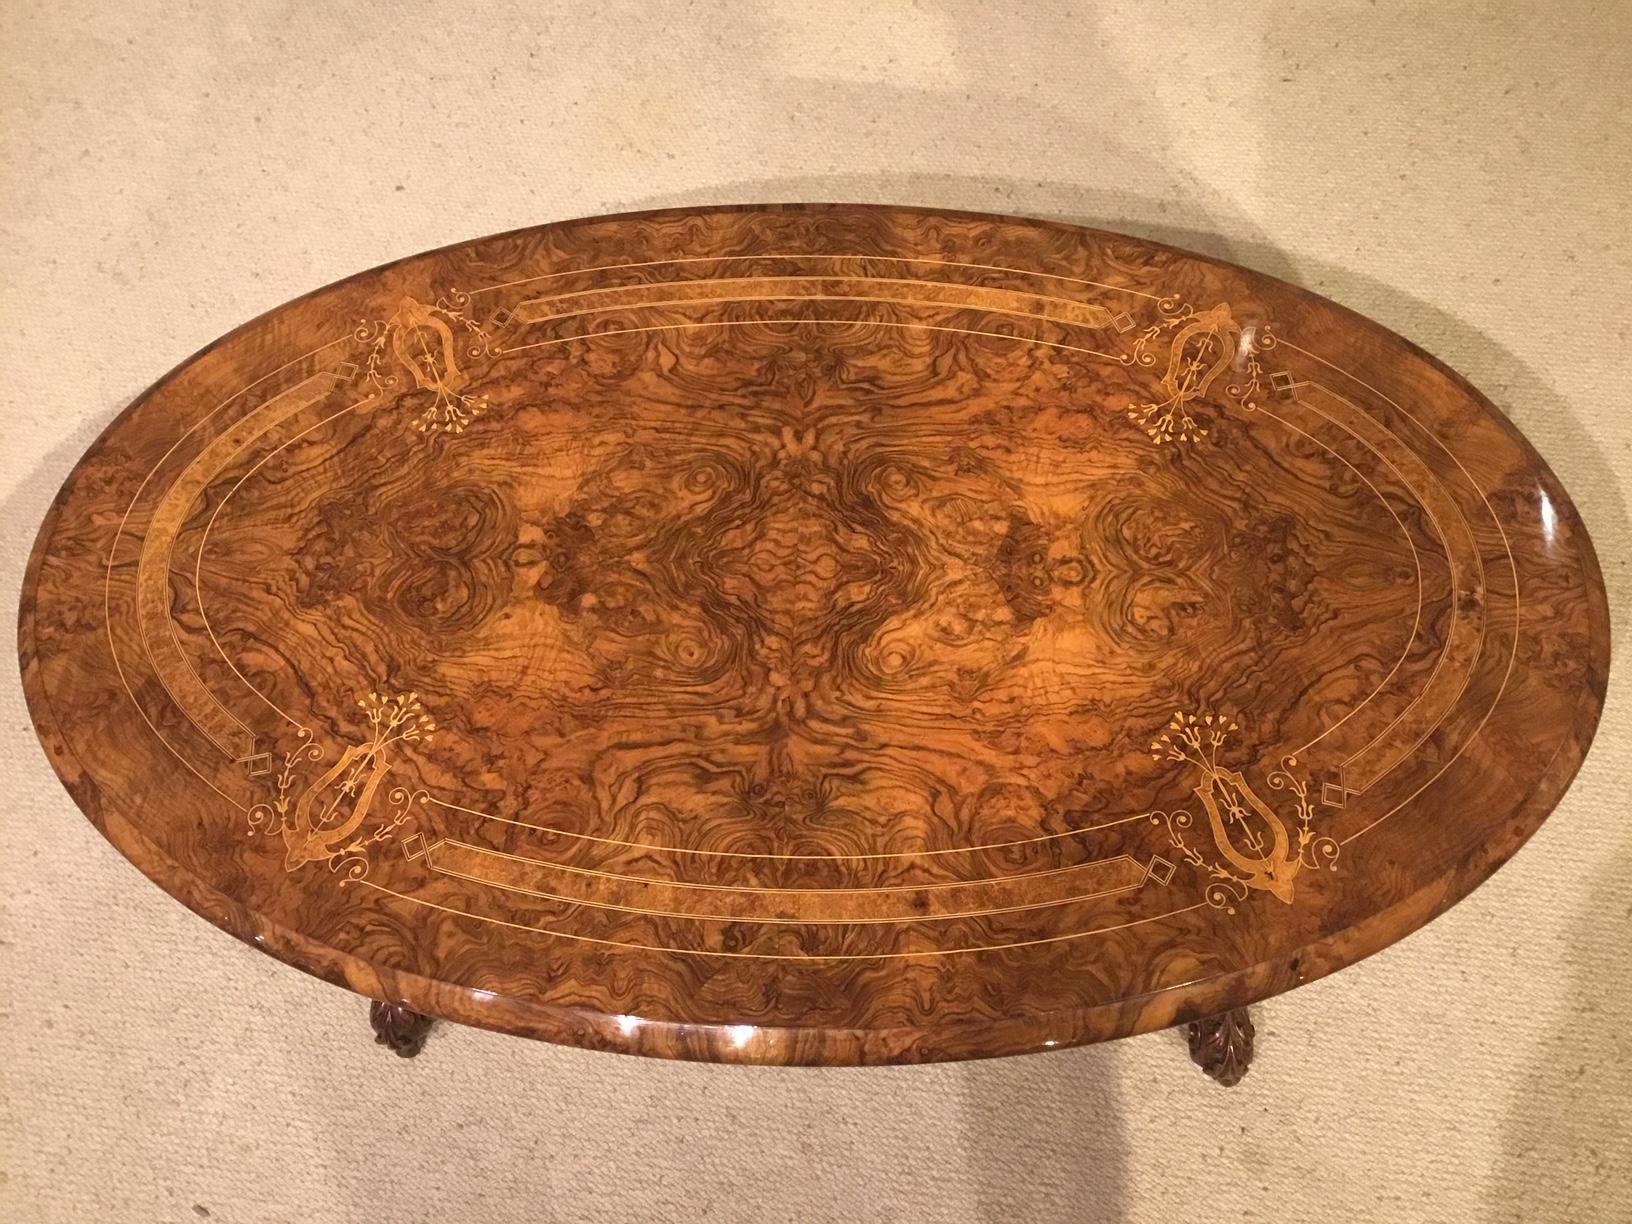 A superb quality burr walnut marquetry inlaid Victorian period antique coffee table. Having an oval top veneered in beautifully figured burr walnut with an amboyna and boxwood inlaid border and fine floral marquetry panels. Supported on four turned